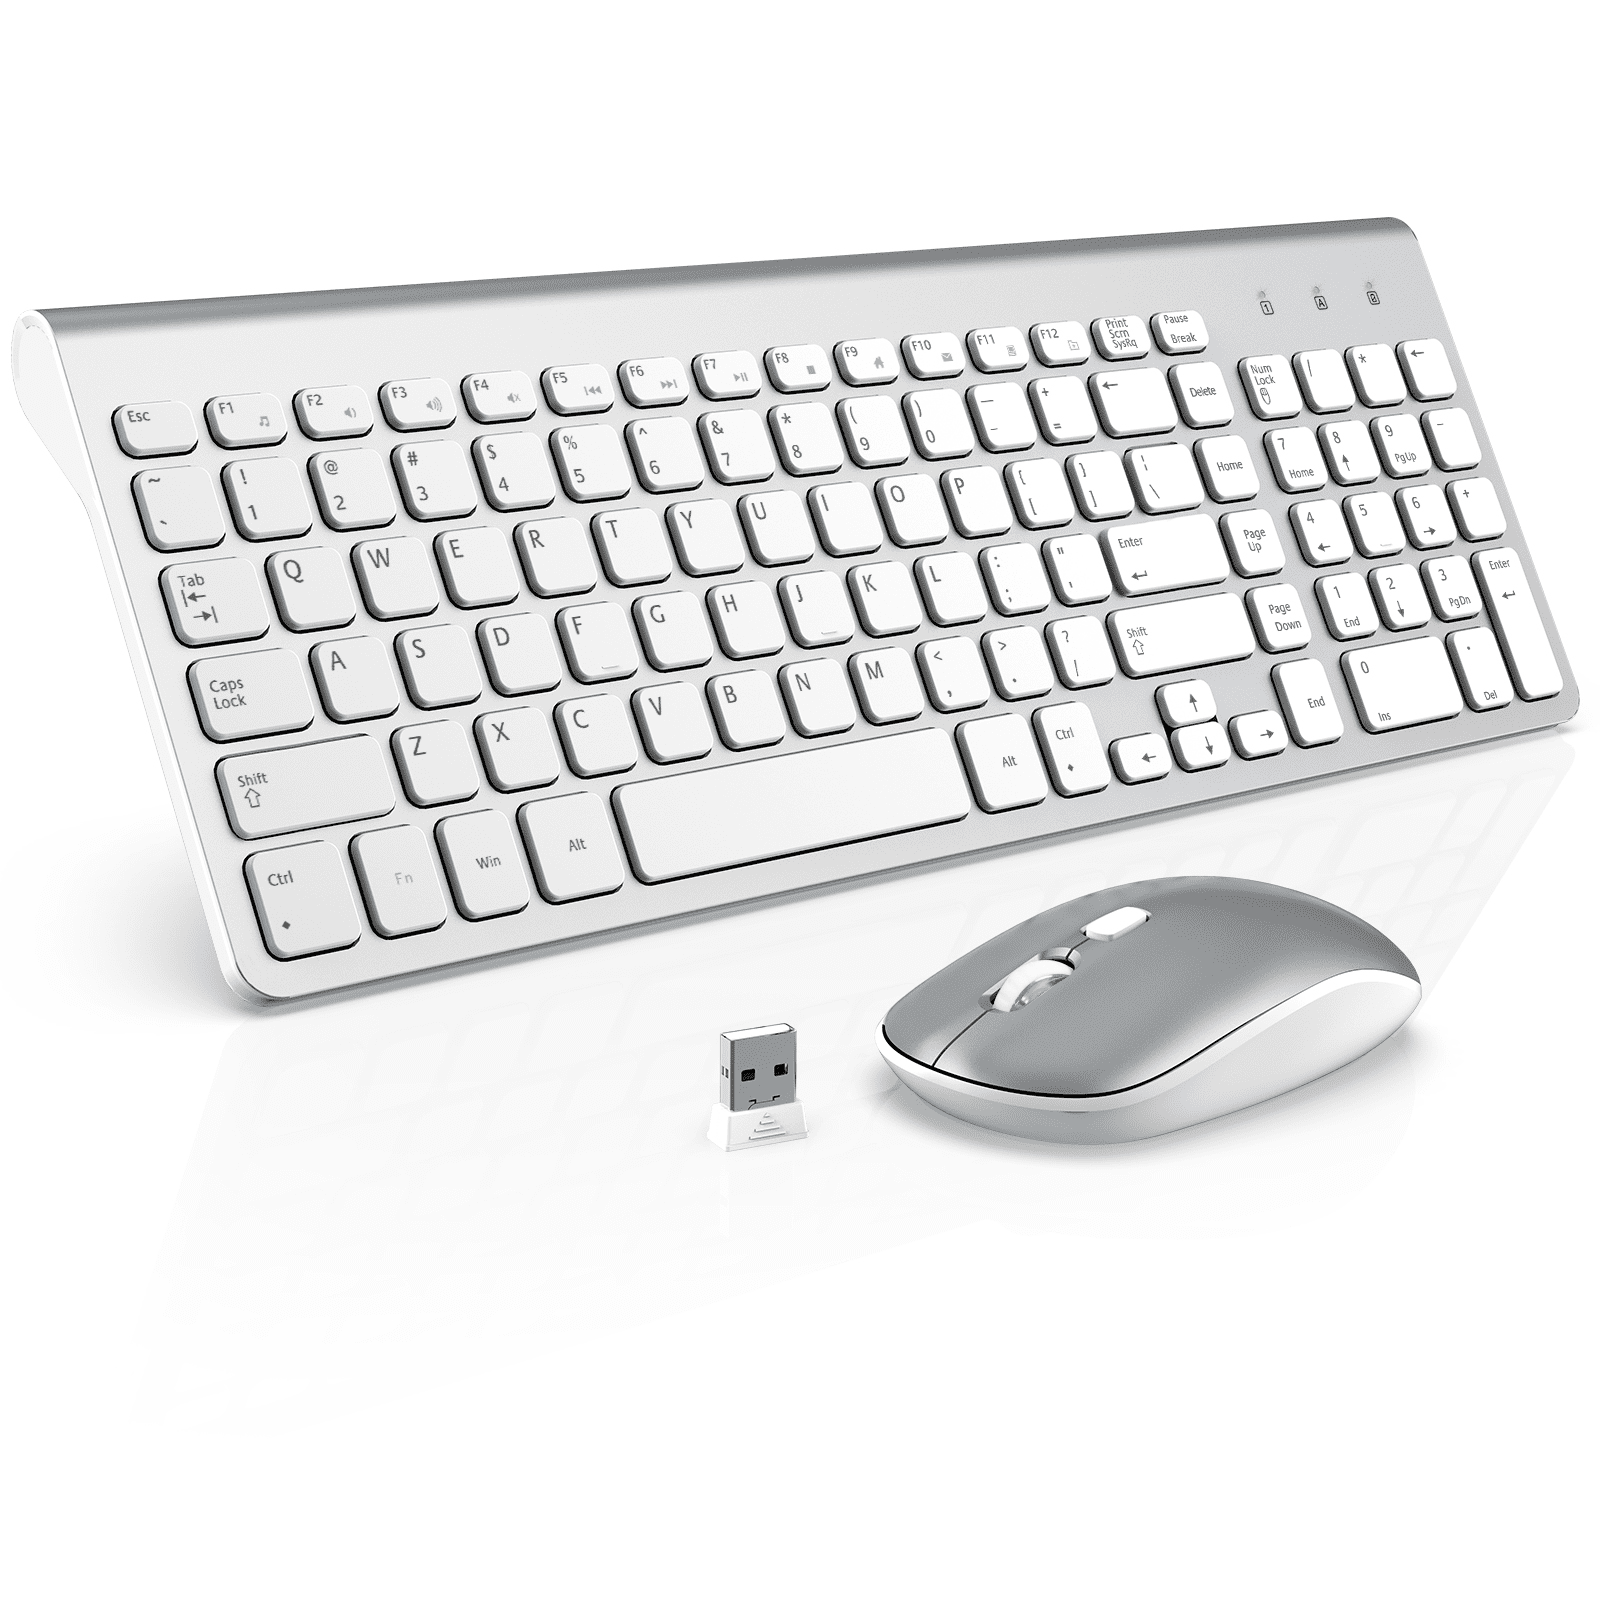 Wireless Keyboard Mouse Combo Silver and Grey WisFox 2.4GHz Slim Full Size Wireless Keyboard and Mouse Set with Number Pad and Nano Receiver for PC Laptop Windows Quiet and Ergonomic 